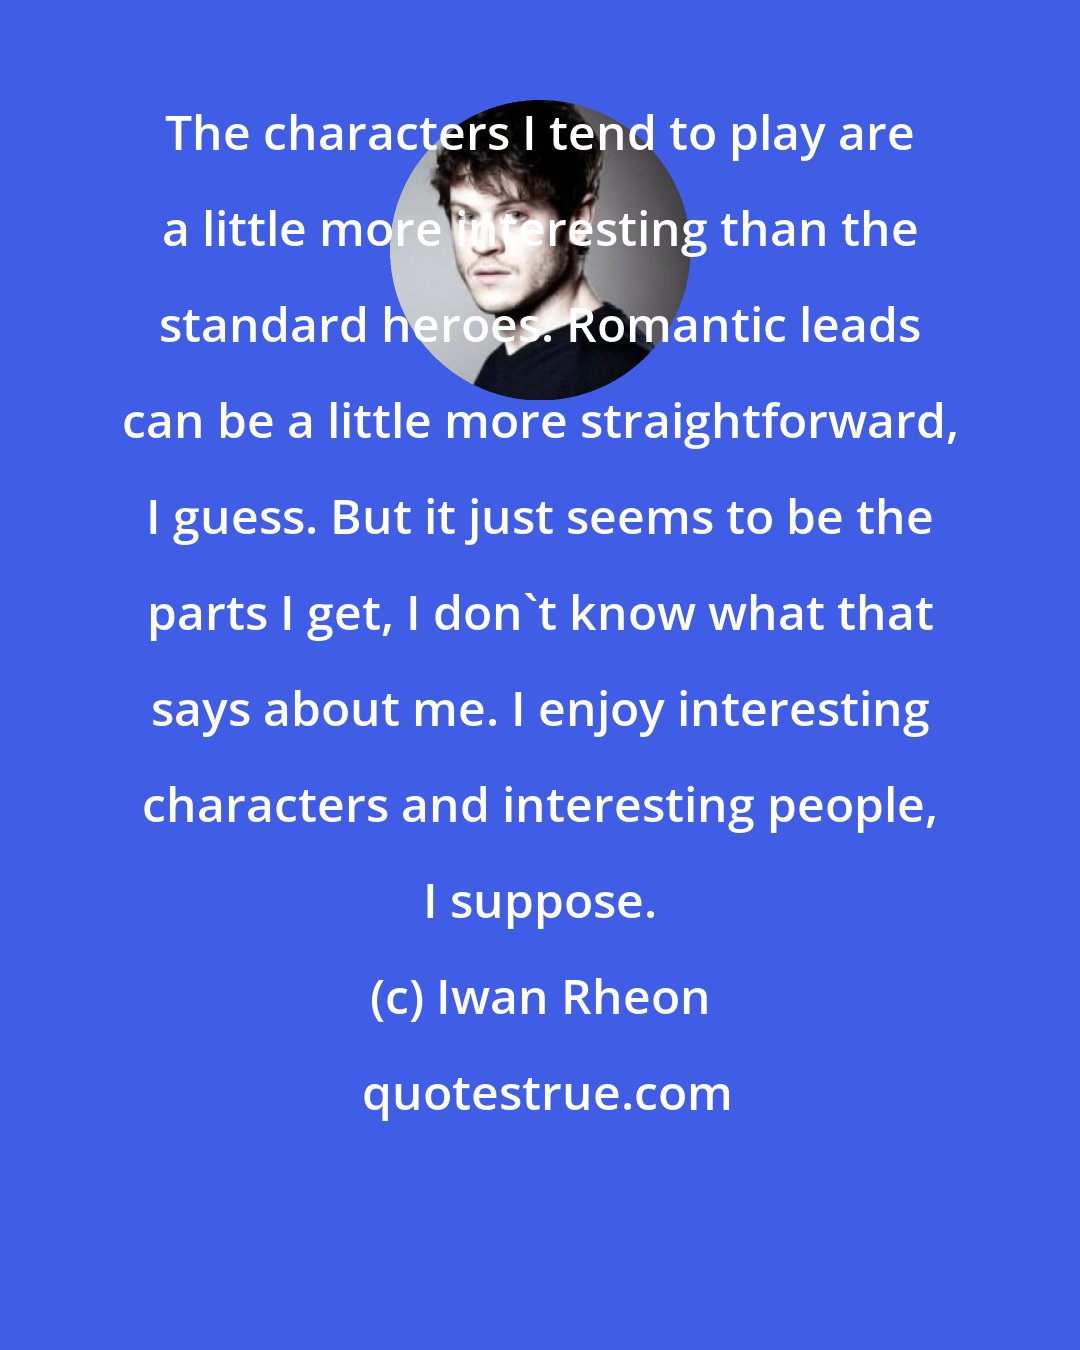 Iwan Rheon: The characters I tend to play are a little more interesting than the standard heroes. Romantic leads can be a little more straightforward, I guess. But it just seems to be the parts I get, I don't know what that says about me. I enjoy interesting characters and interesting people, I suppose.